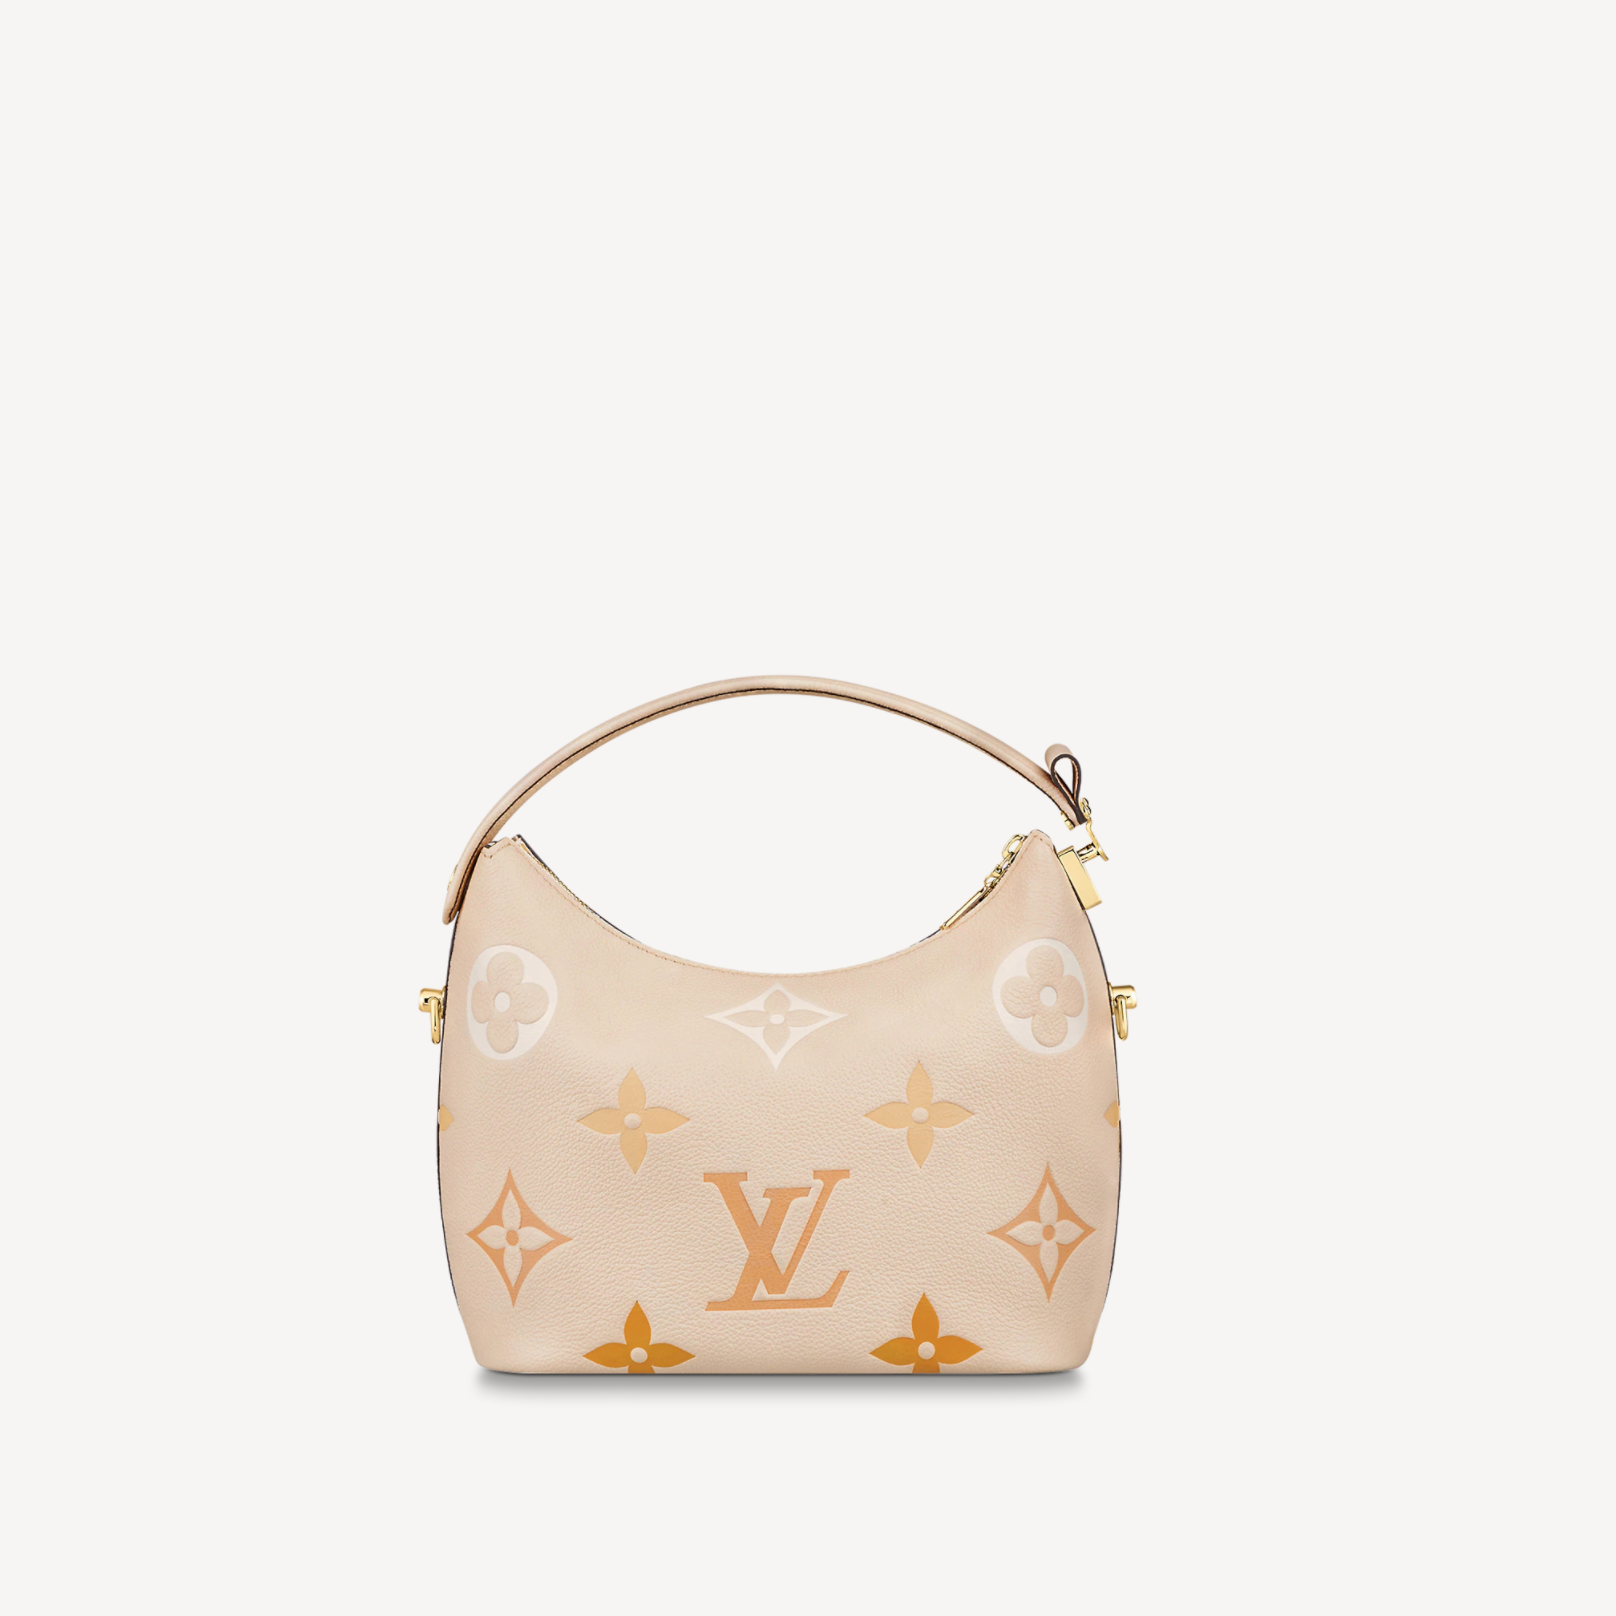 Louis Vuitton Marshmallow Cream Ombre By The Pool Hobo Bag, Sold Out